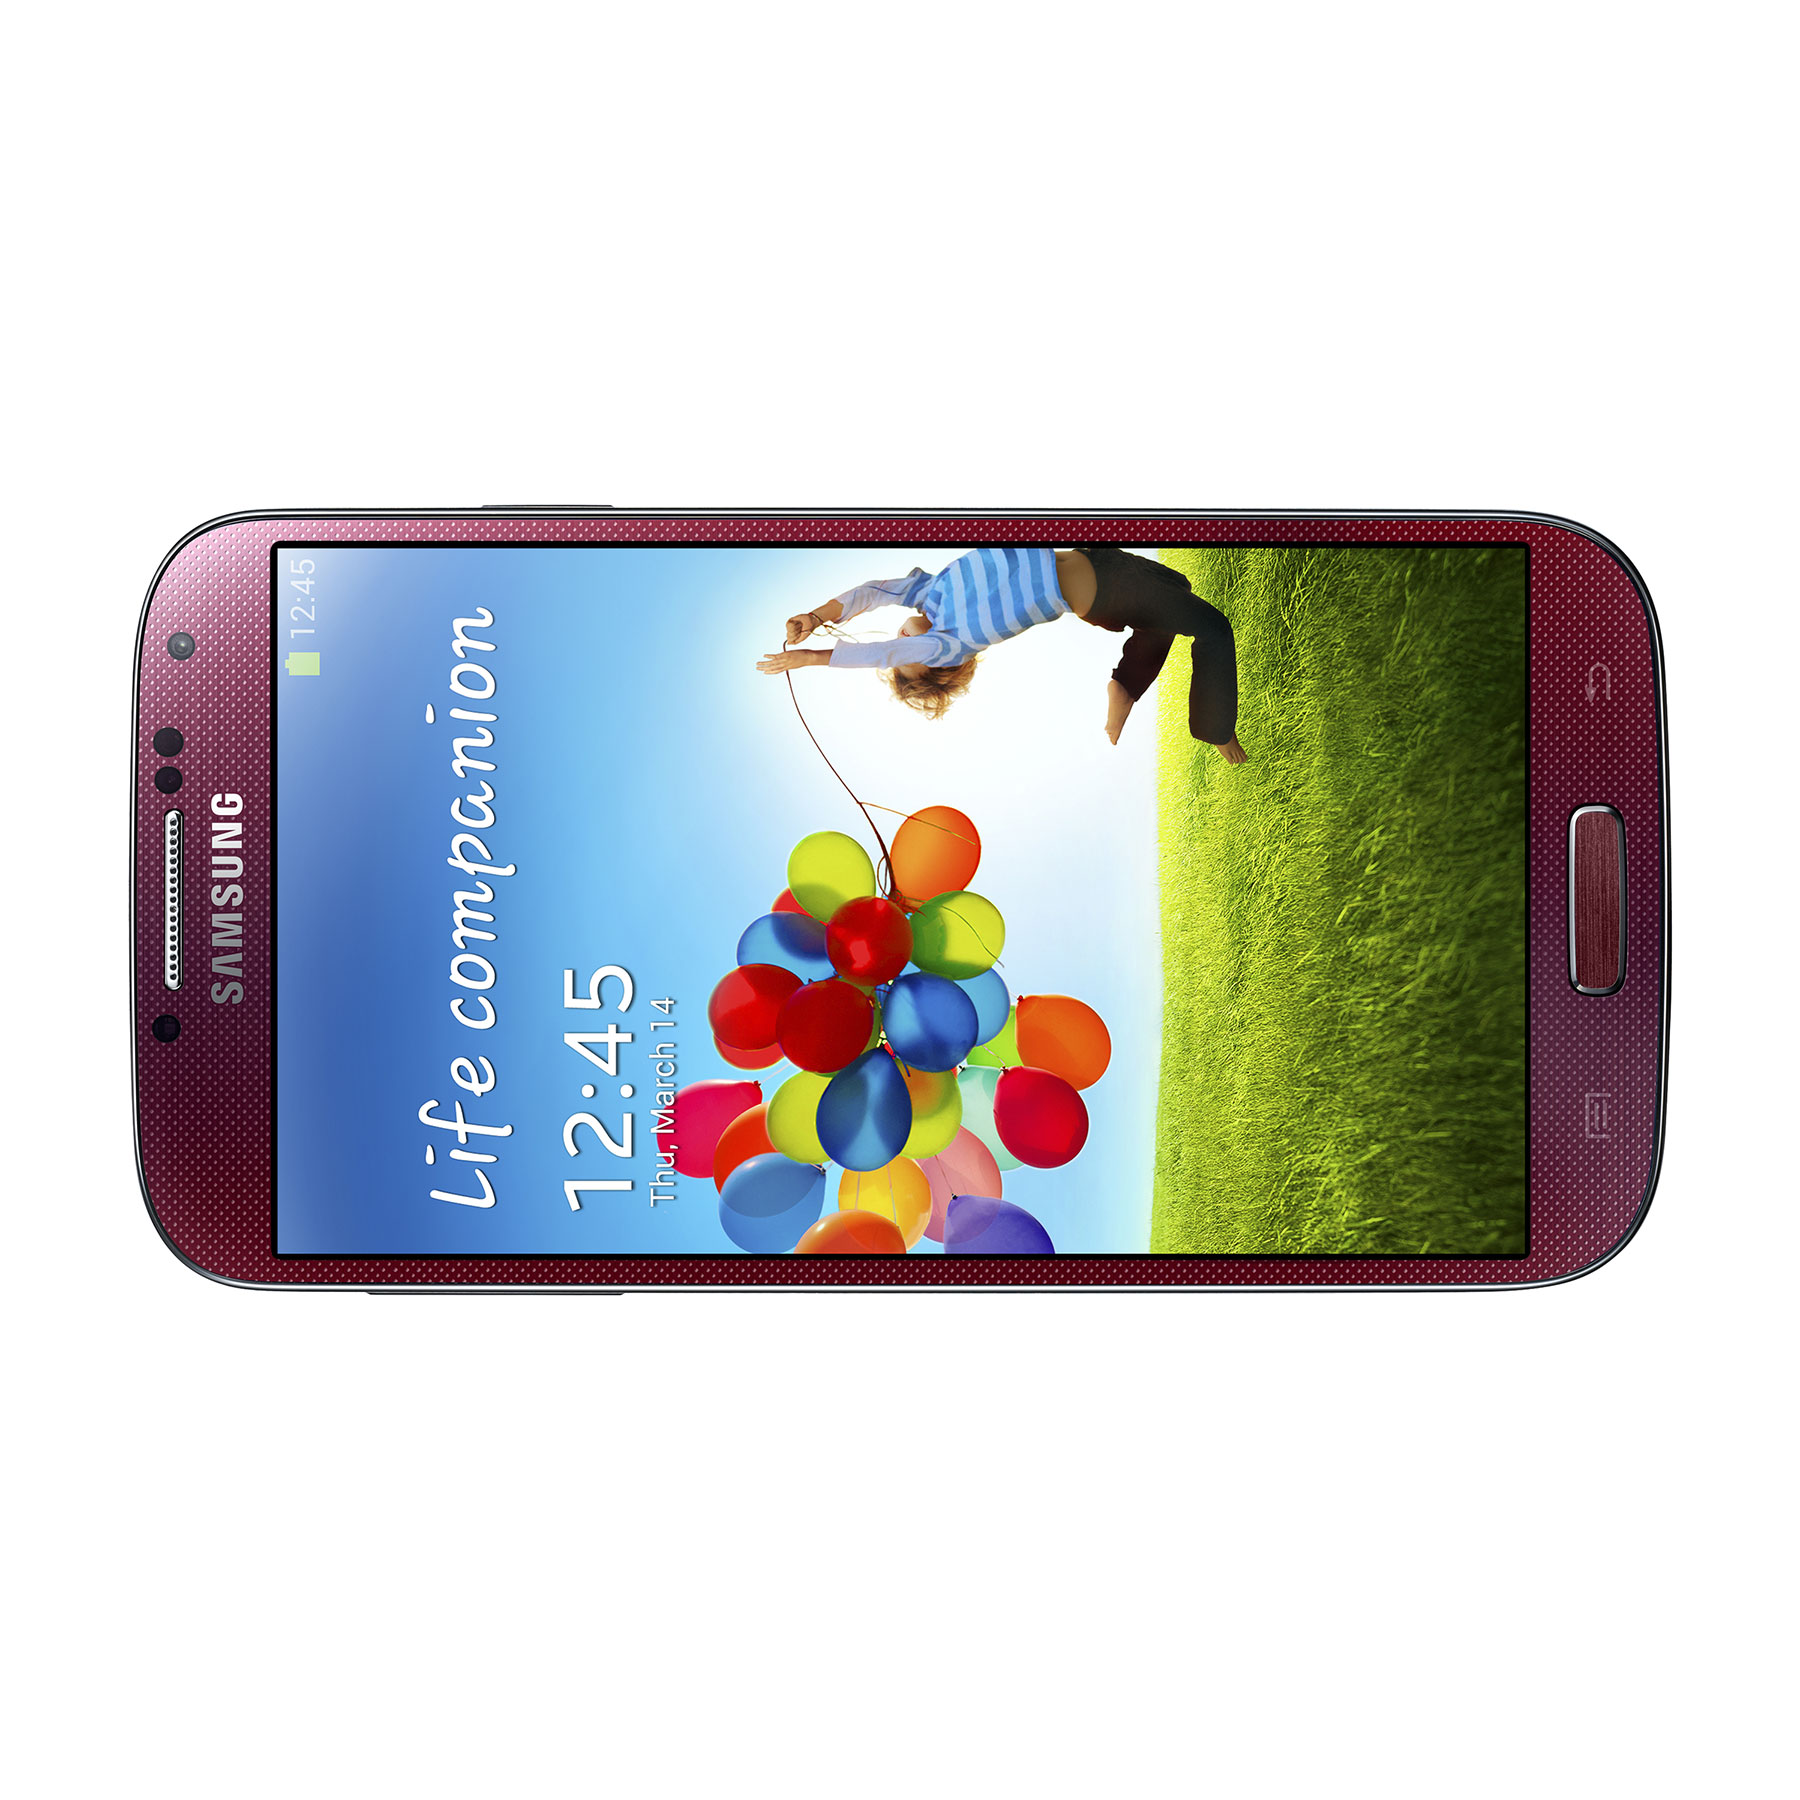 Samsung Galaxy S4 Gt I9505 Red Aurora 16 Go Mobile And Smartphone